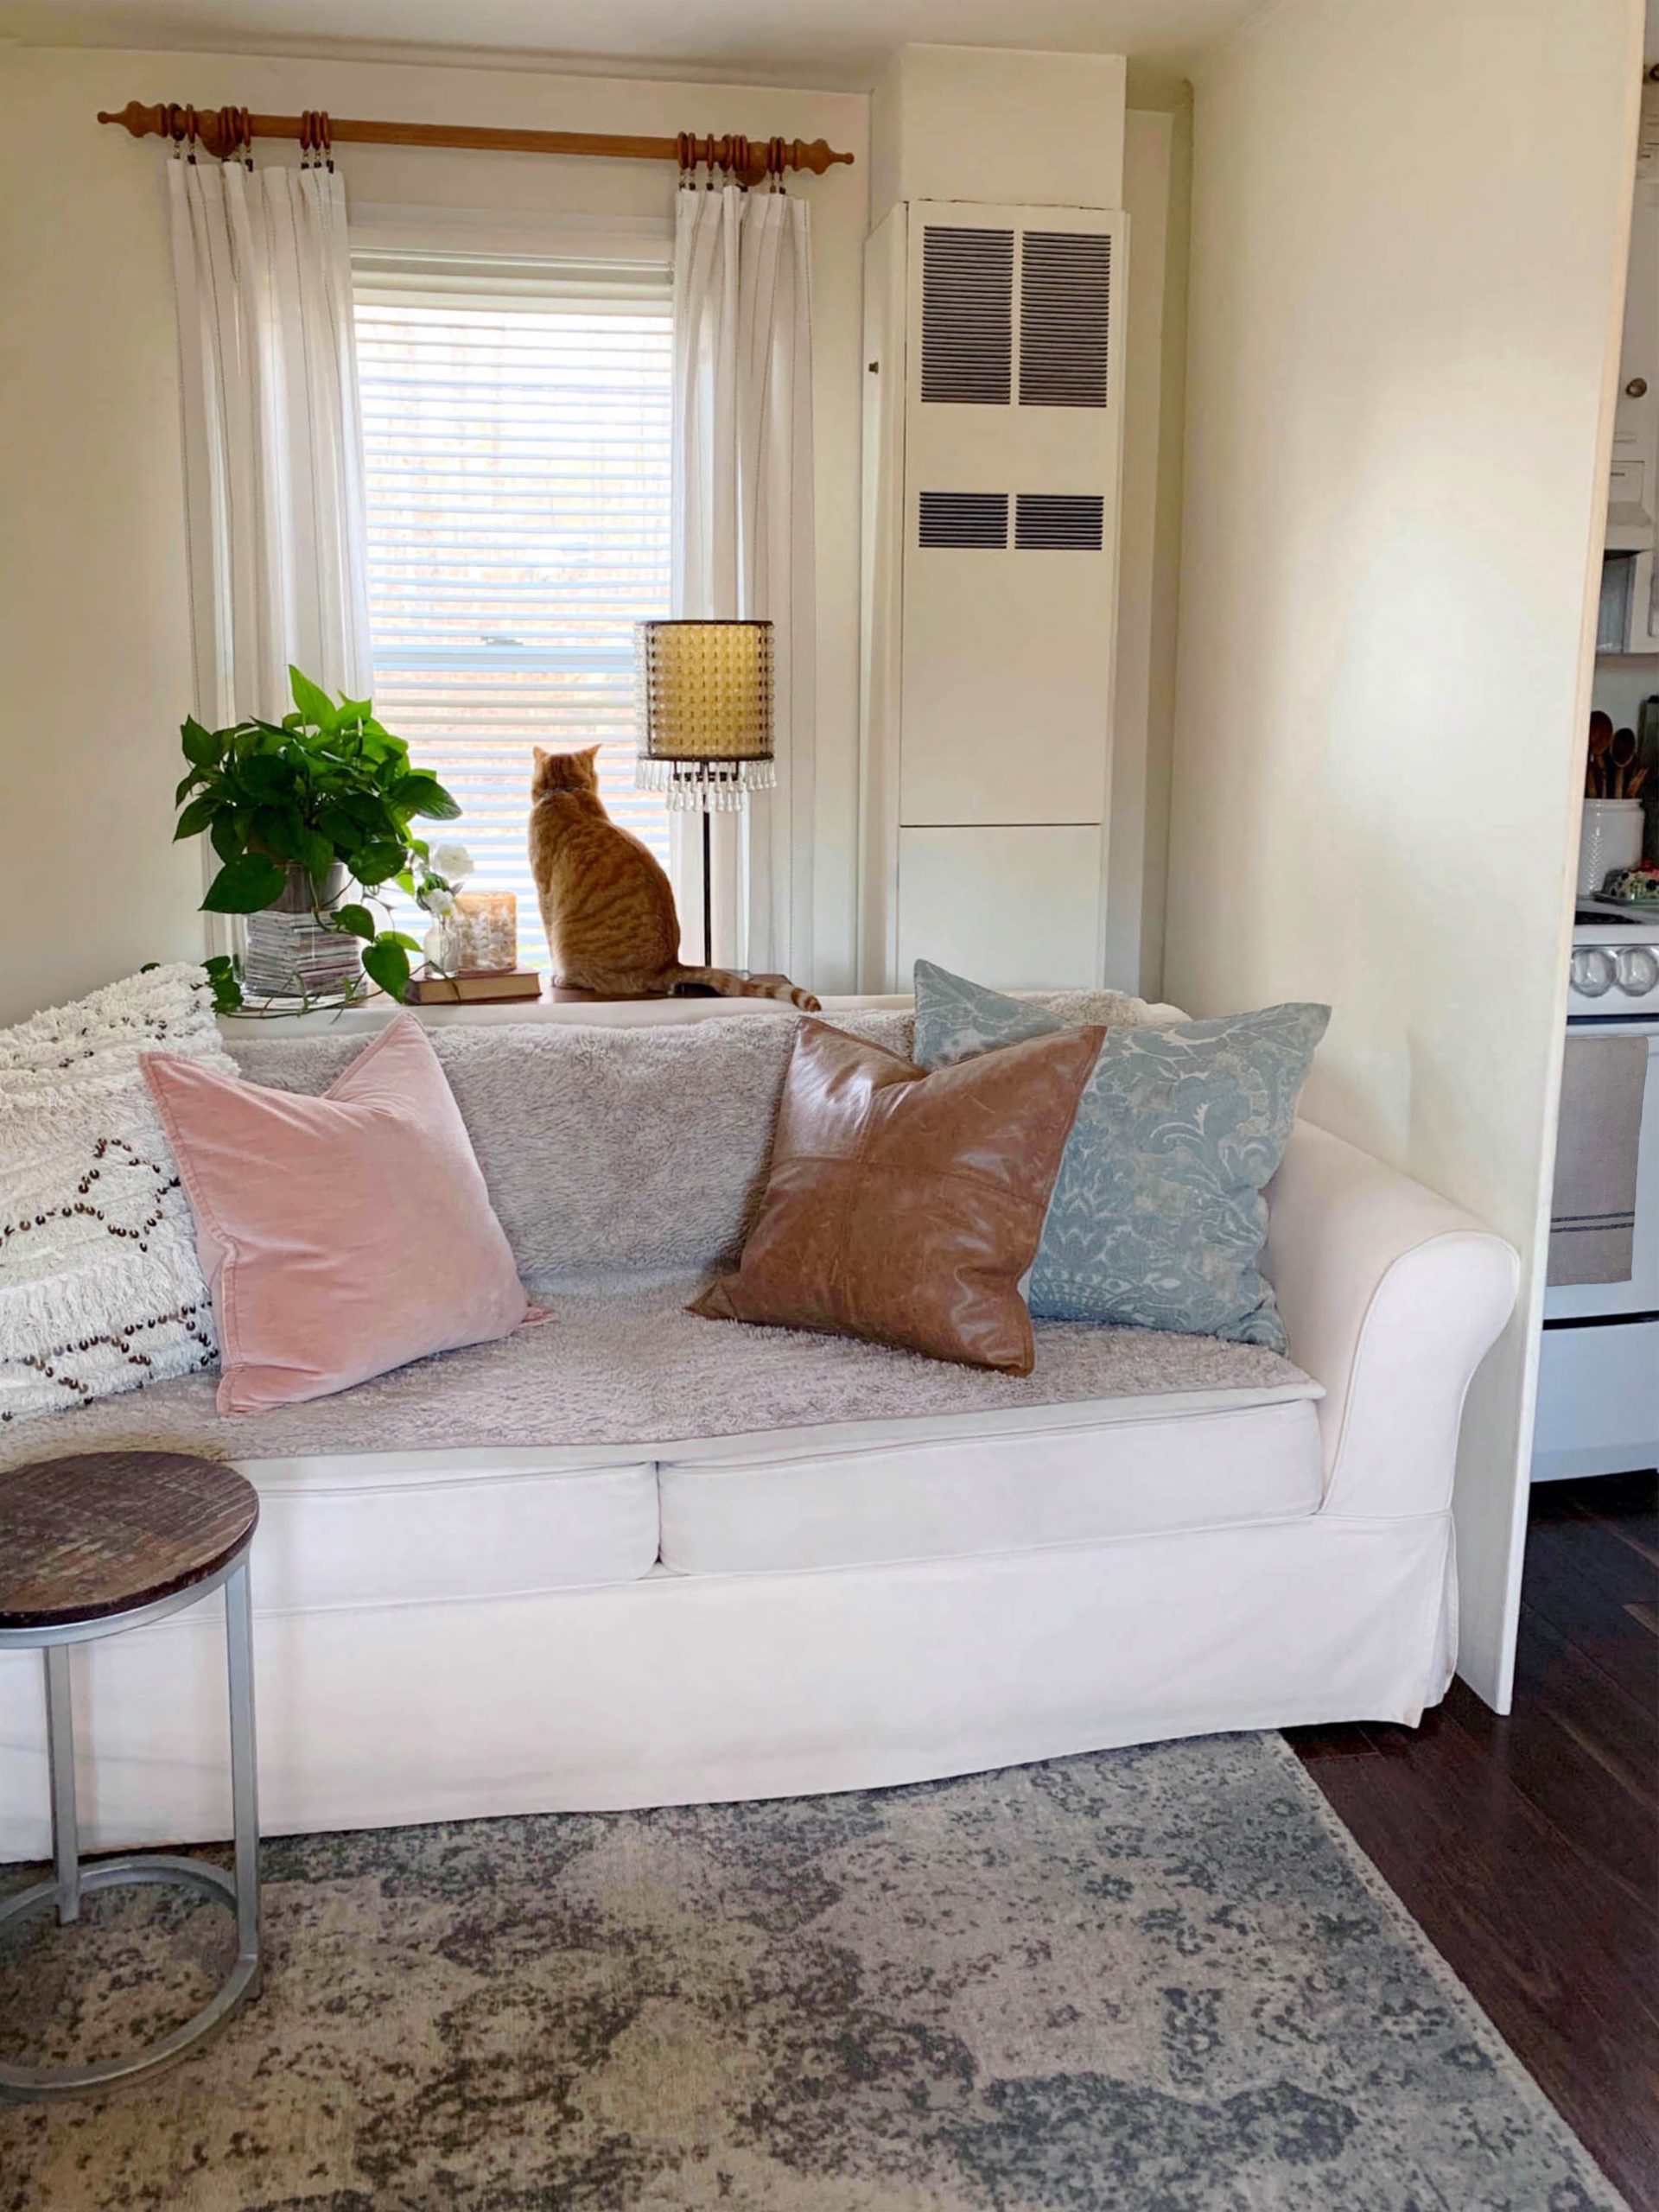 Small-Space Design: Our Cottage Living Room